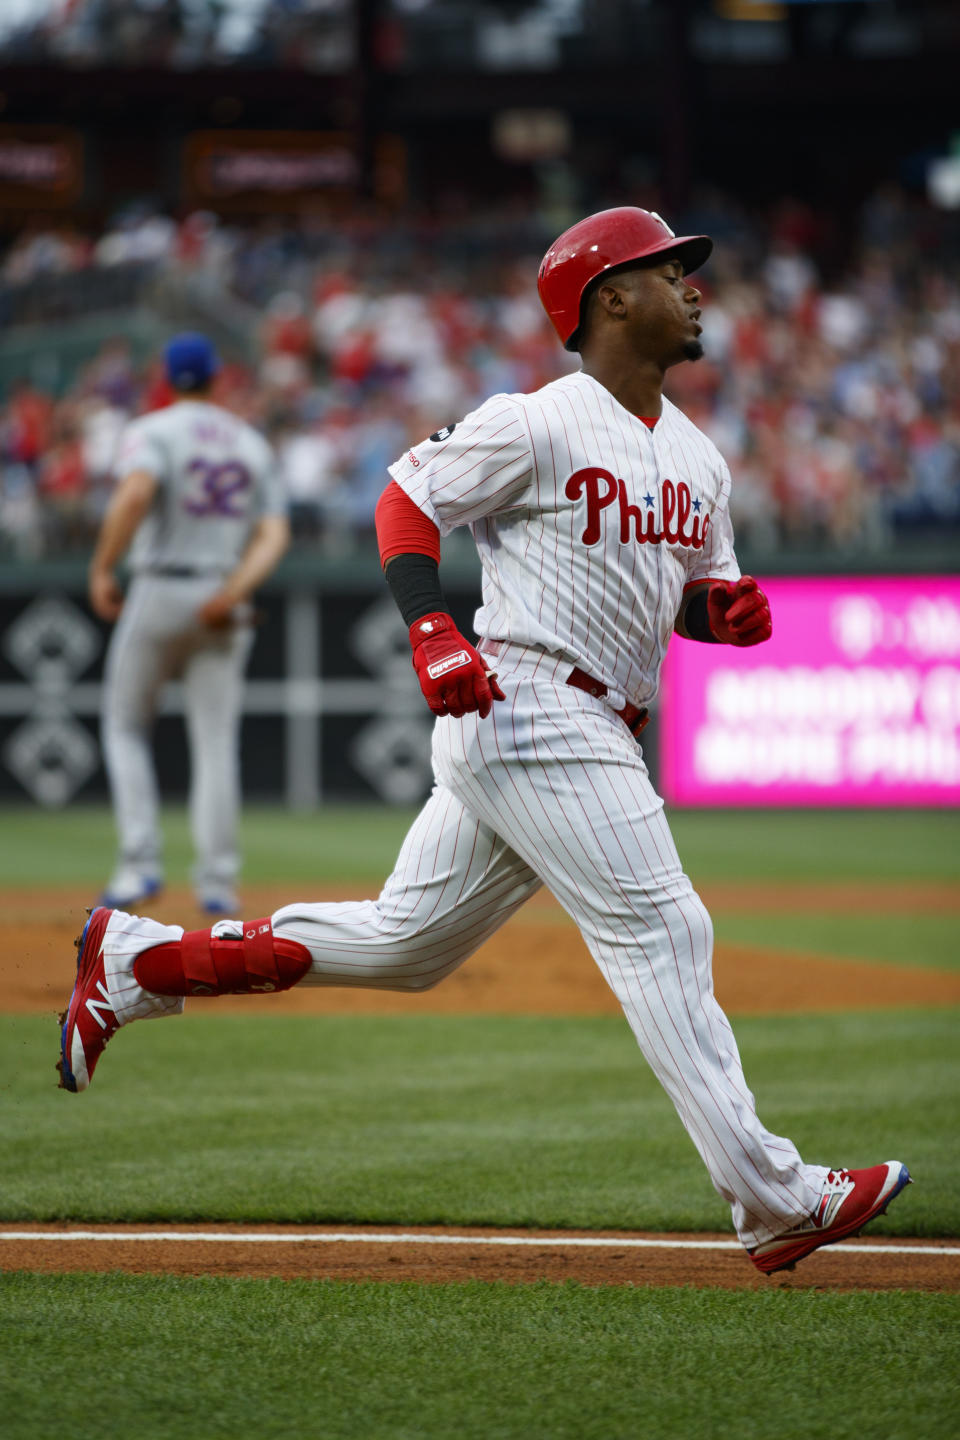 Philadelphia Phillies' Jean Segura, foreground, rounds the bases after hitting a home run off New York Mets starting pitcher Steven Matz, back left, during the first inning of a baseball game, Monday, June 24, 2019, in Philadelphia. (AP Photo/Matt Slocum)